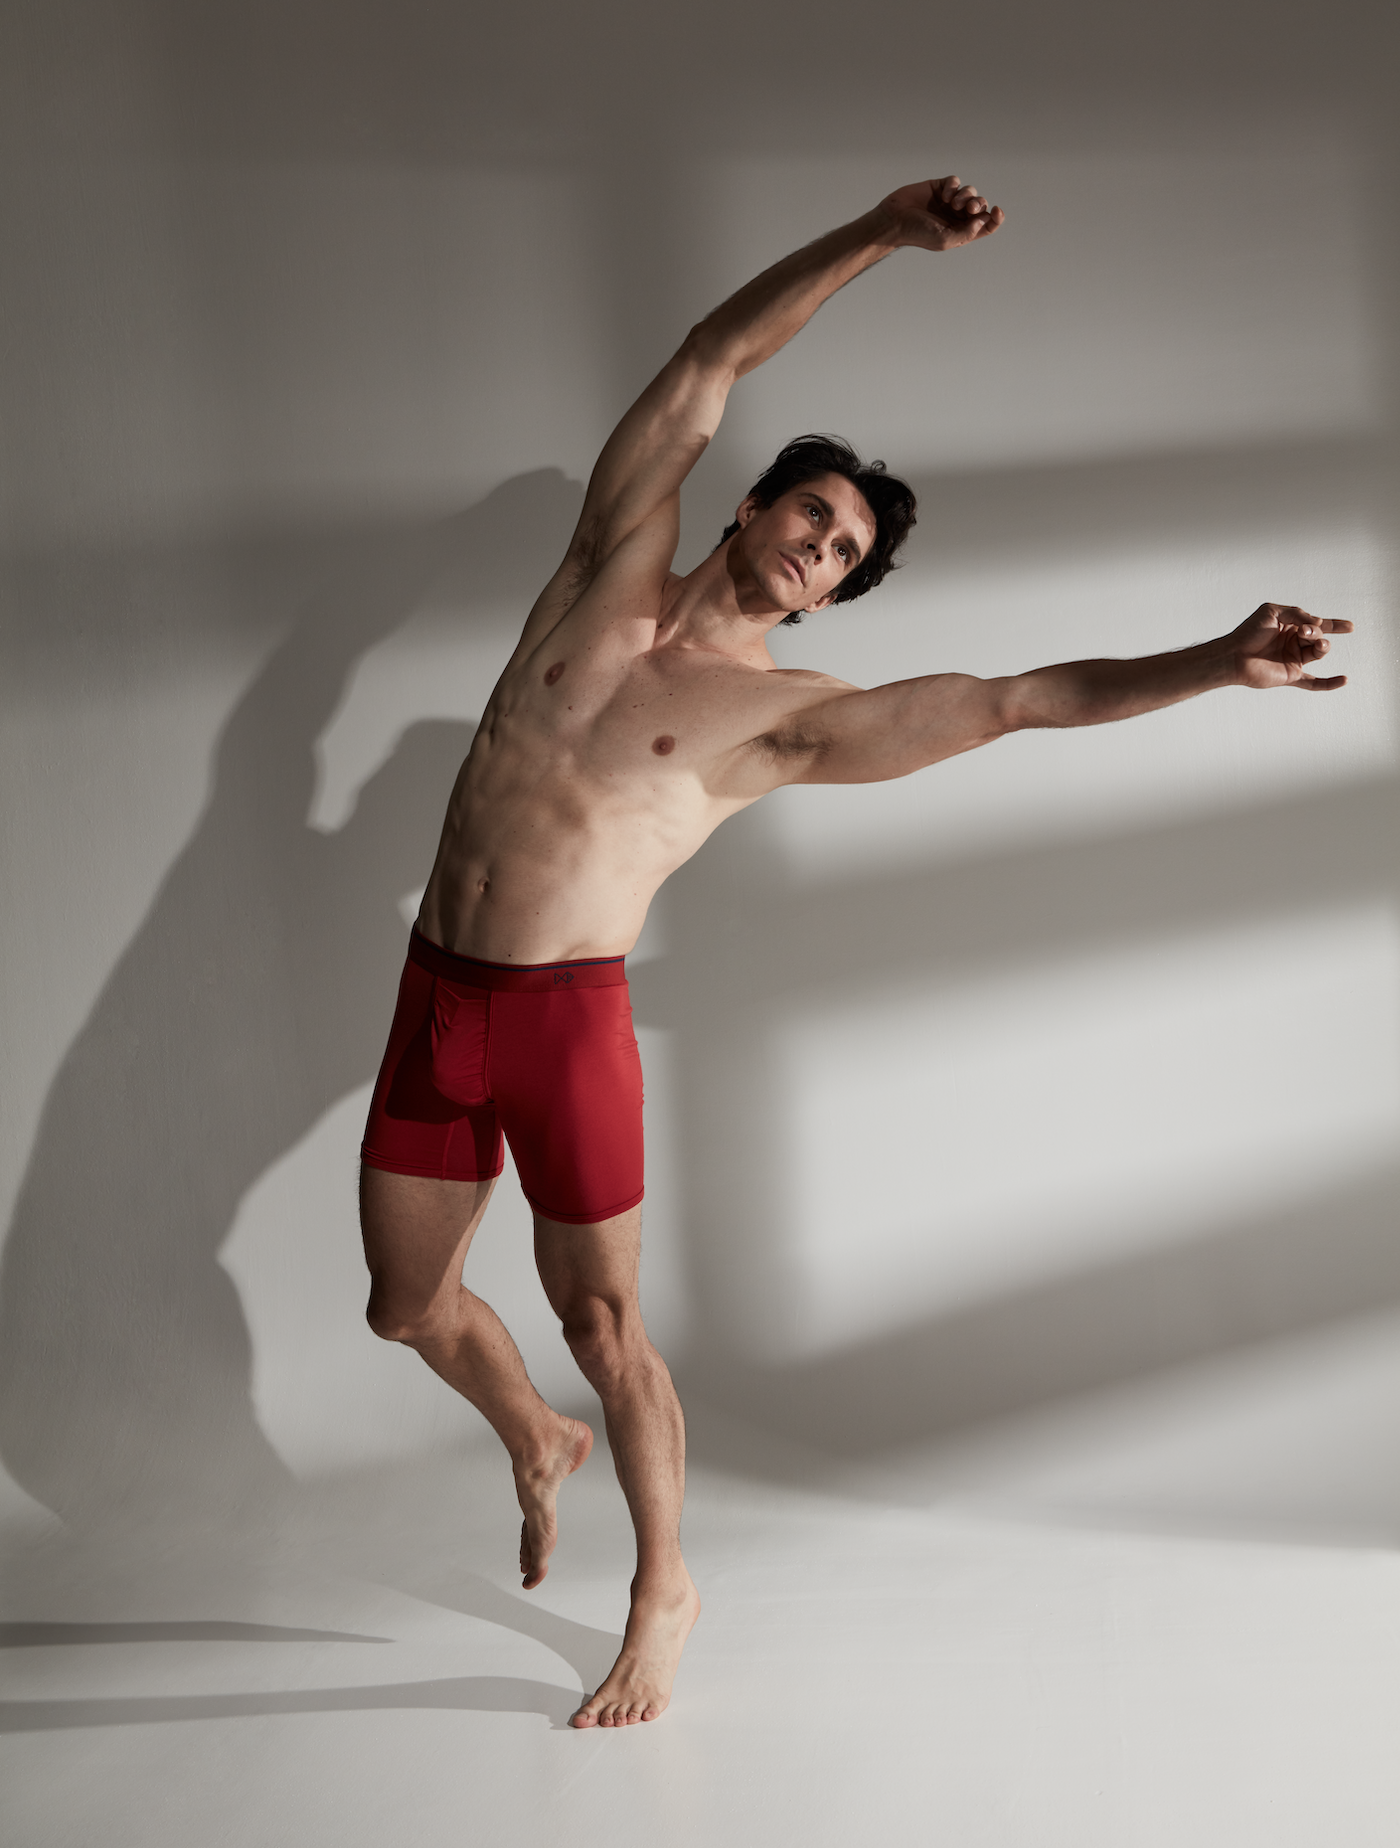 A man wearing red shorts dancing in front of a white background with a shadow. Creative promotional image captured by I Heart Studios.